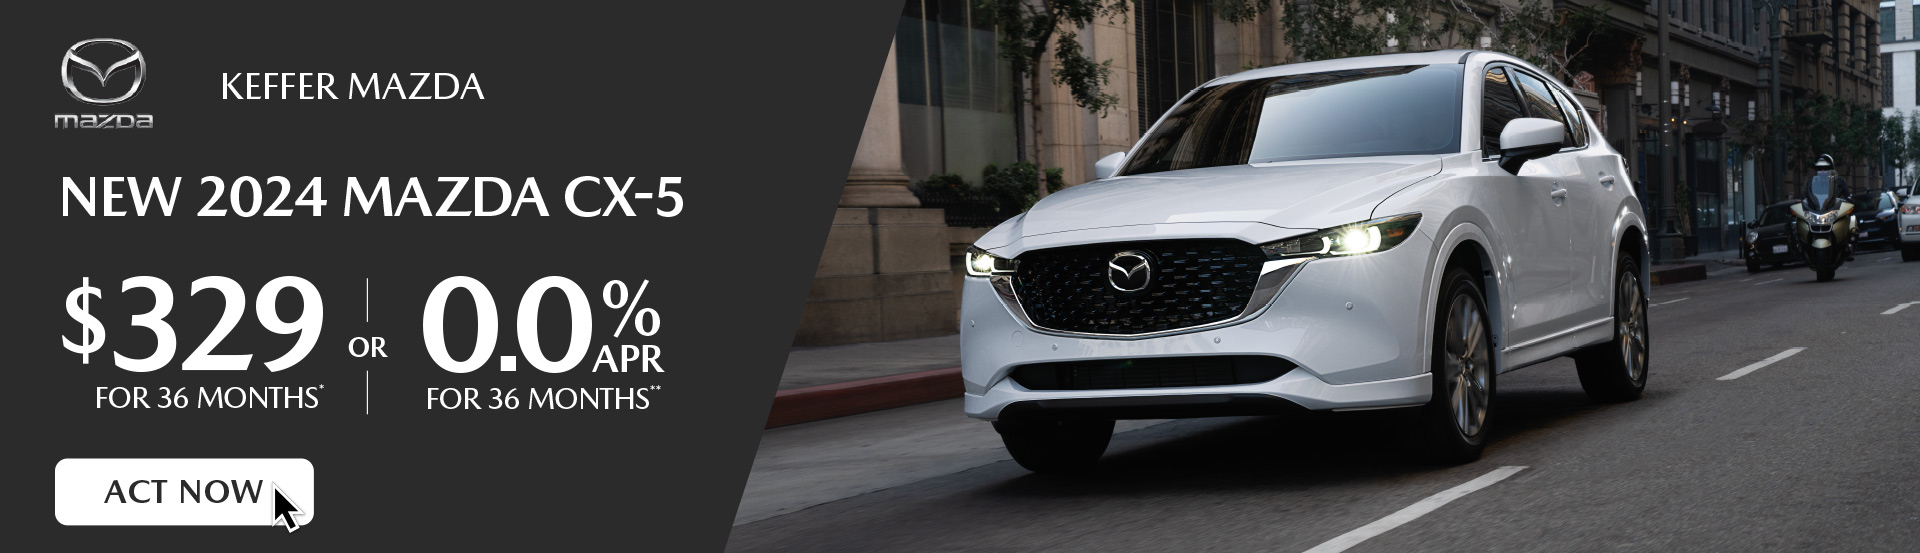 NEW 2023 MAZDA CX-30 – $229/mo for 36 months* or 2.9% for up to 36 months plus No Payments for up to 90 Days**